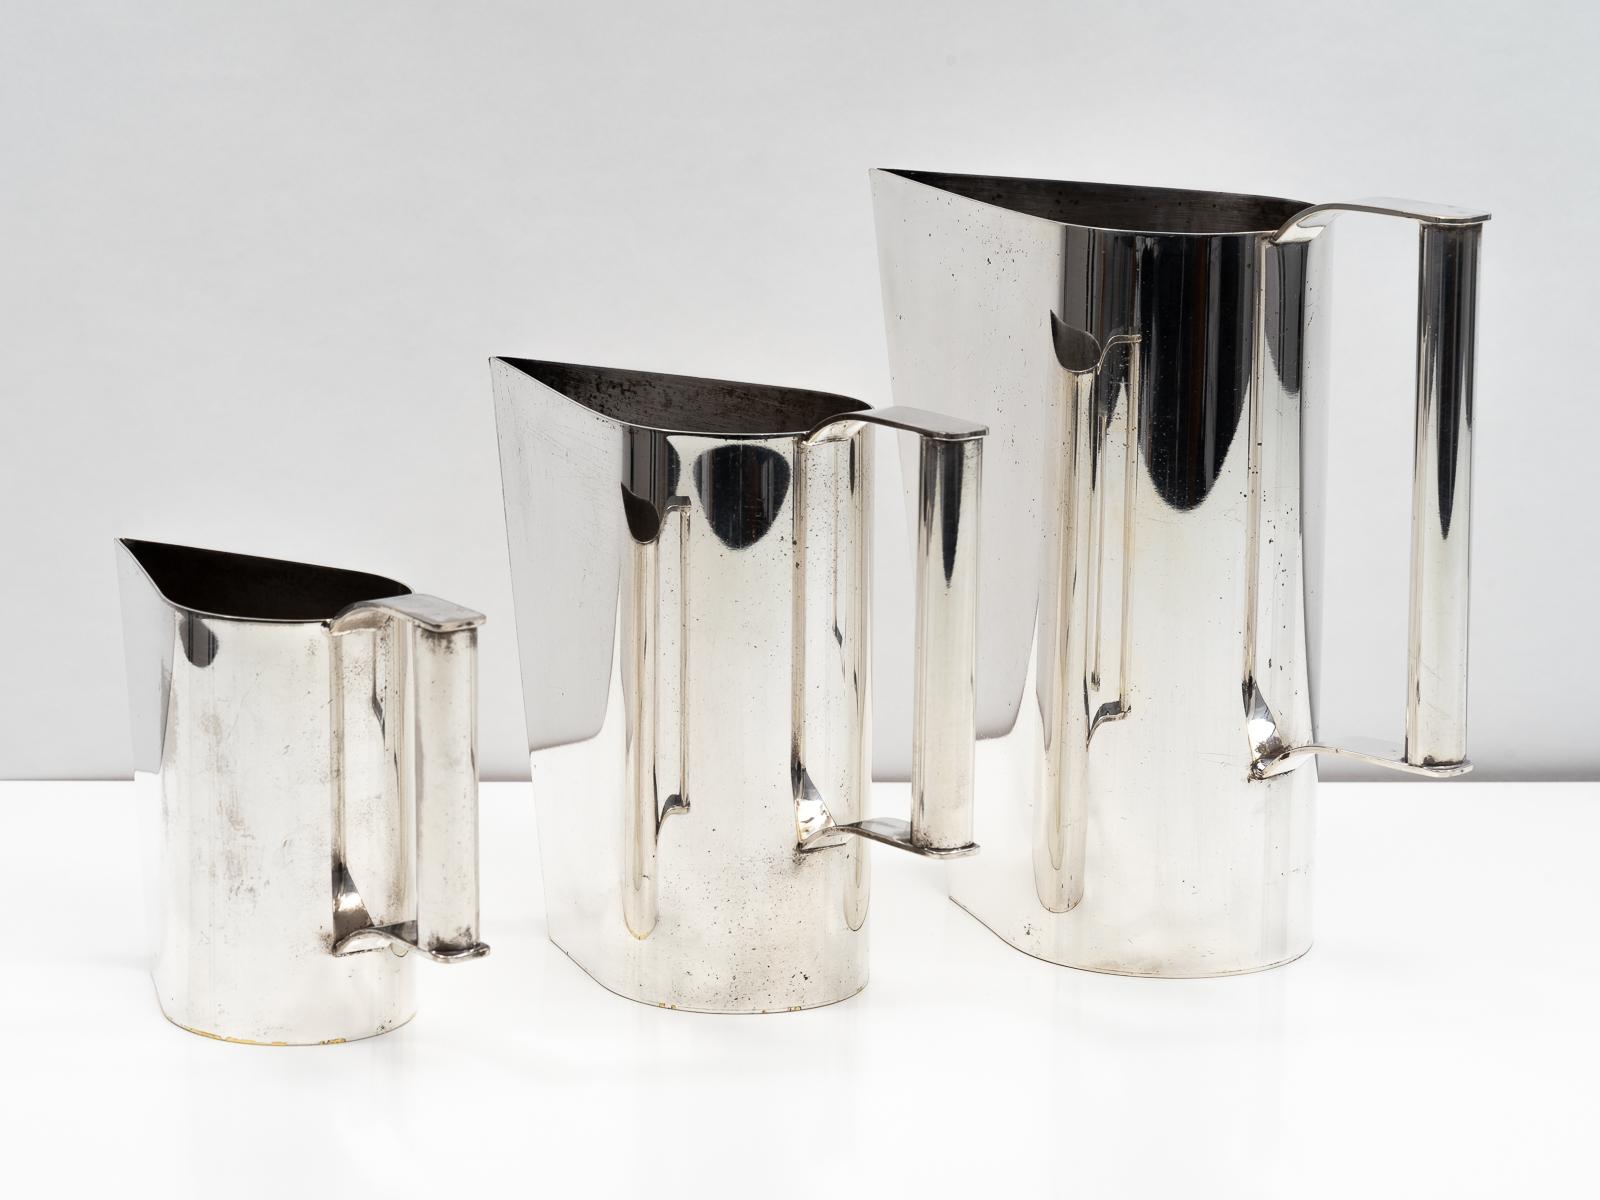 Italian Set of 3 Silver Plated Modernist Pitchers Attributed to Cini Boeri, circa 1975 For Sale